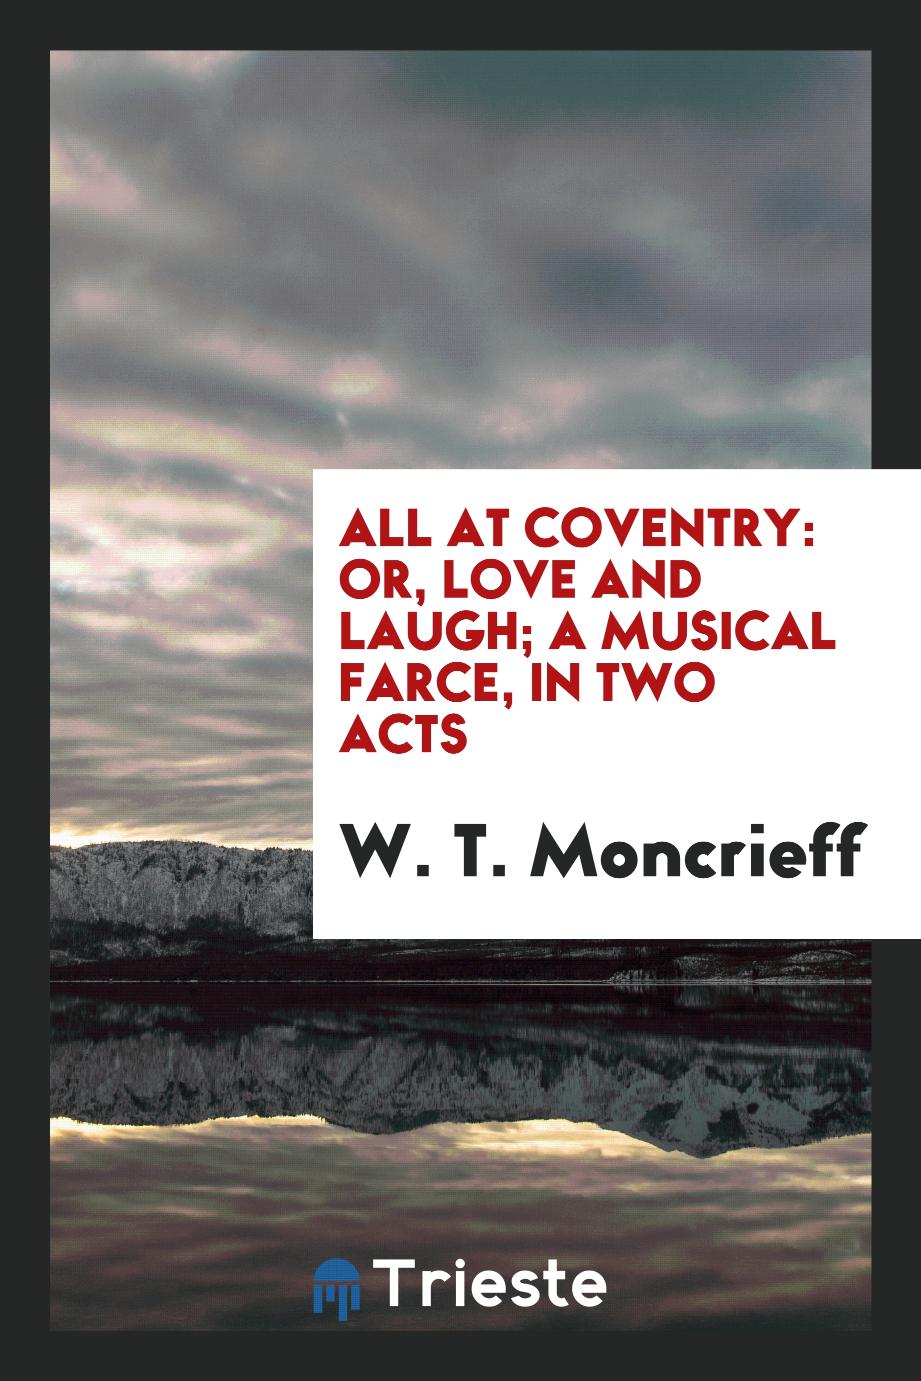 All at Coventry: Or, Love and Laugh; a Musical Farce, in two acts